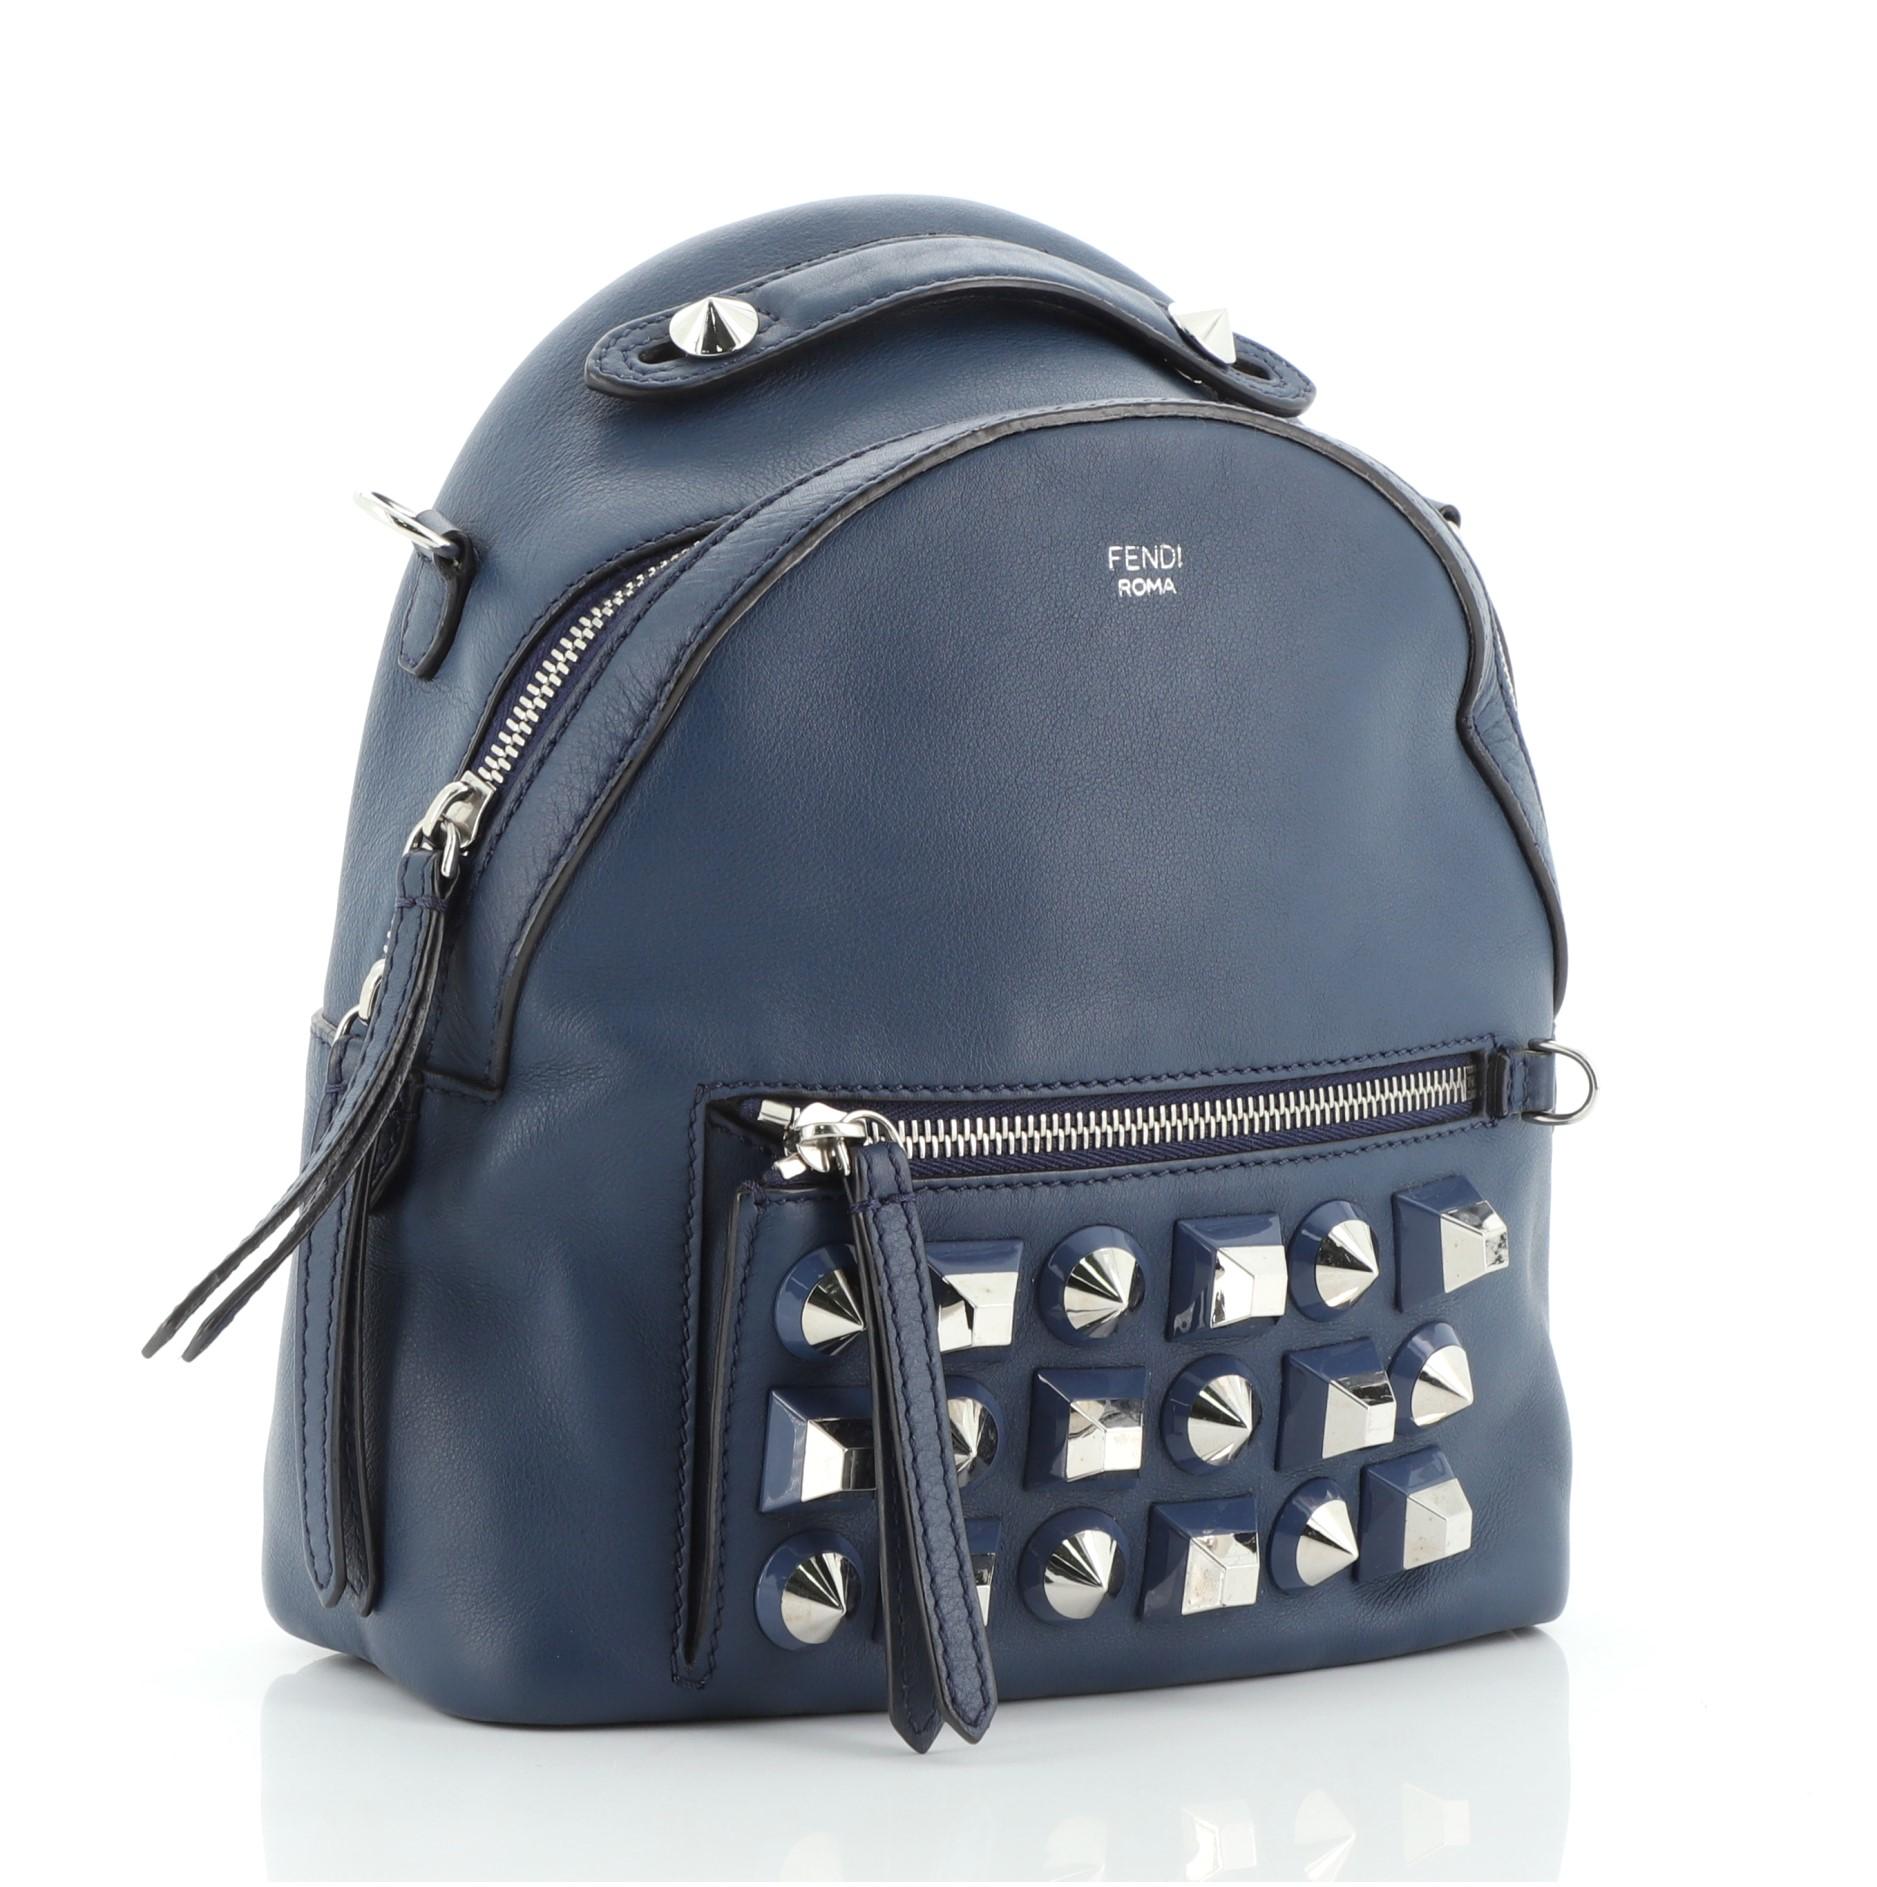 Fendi By The Way Backpack Crossbody Studded Leather Mini
Blue

Condition Details: Wear on base corners, moderate creasing on exterior, minor wear on strap. Splitting on opening trim wax edges, light cracking on strap wax edges, wear and marks in